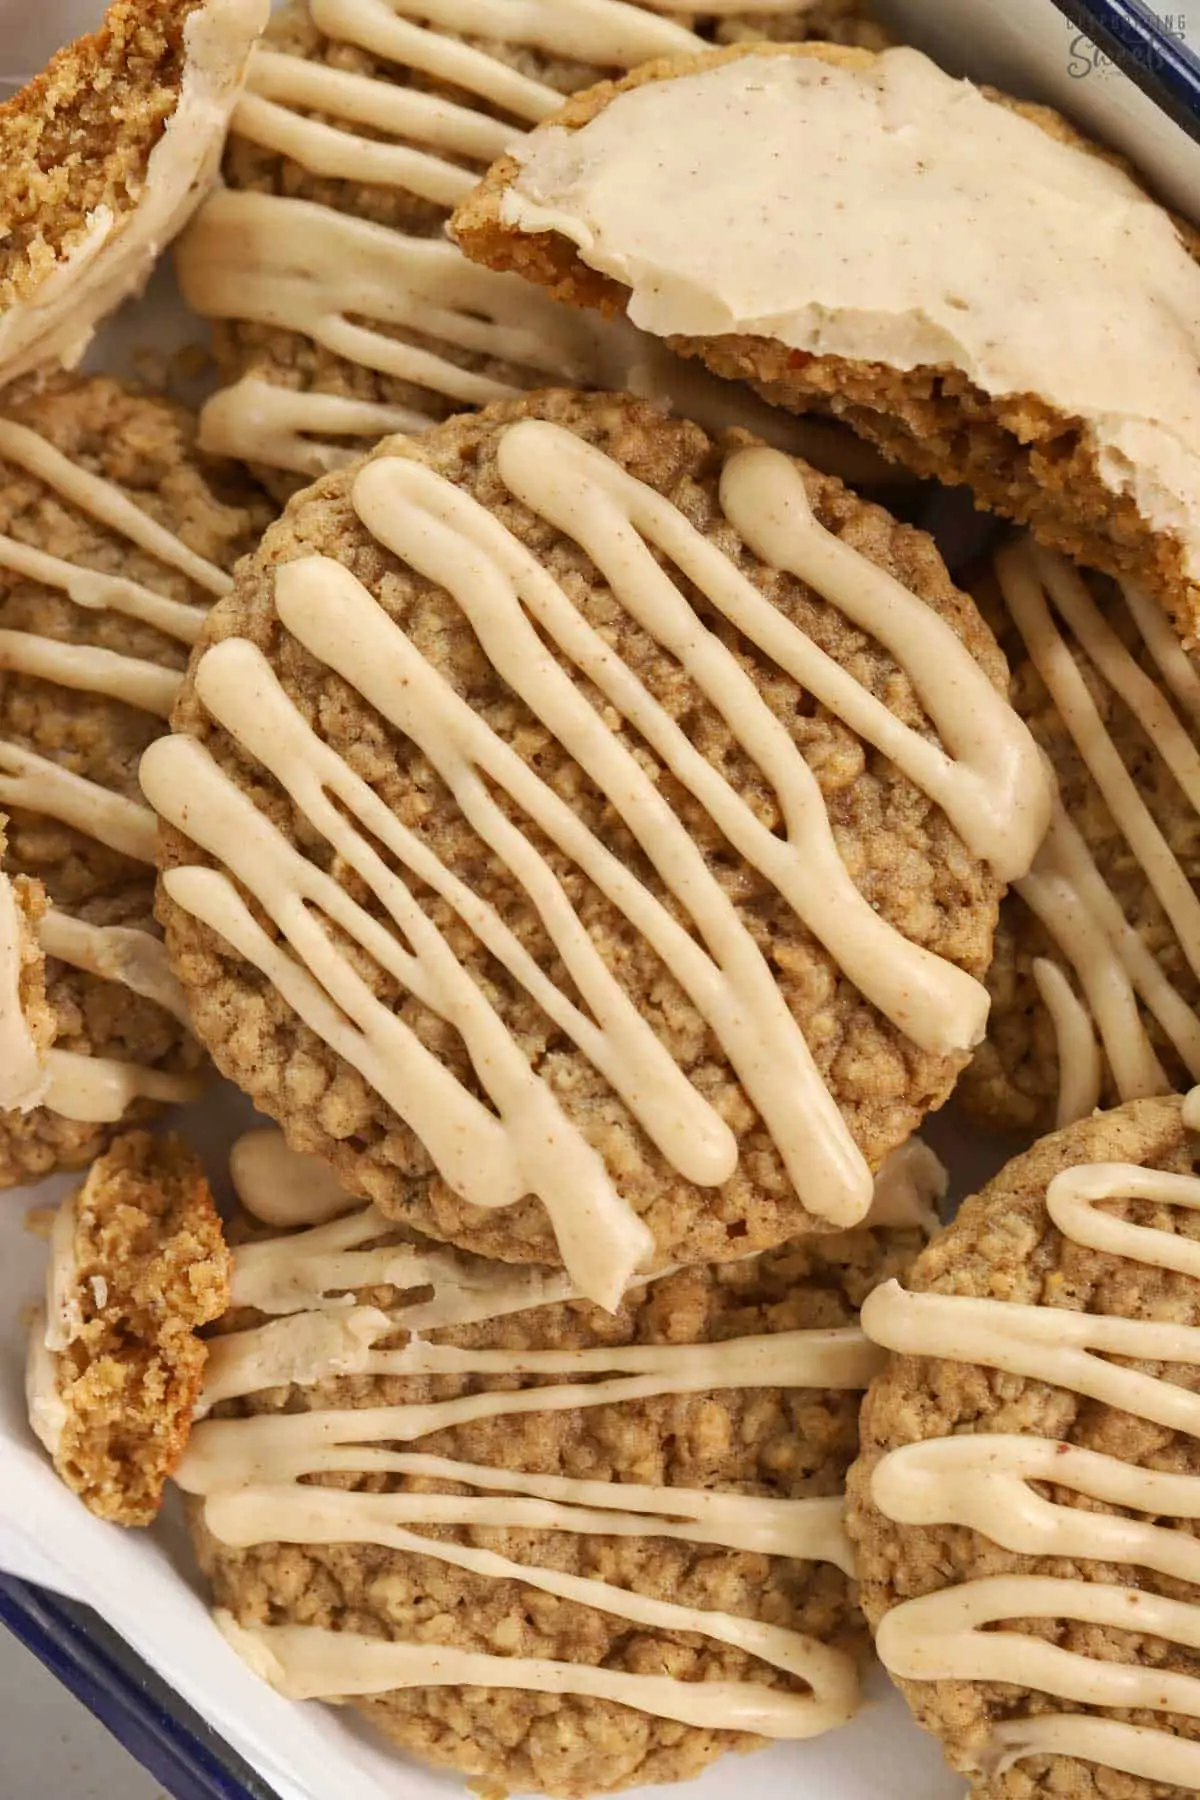 Pile of oatmeal cookies topped with maple icing on a blue and white tray.